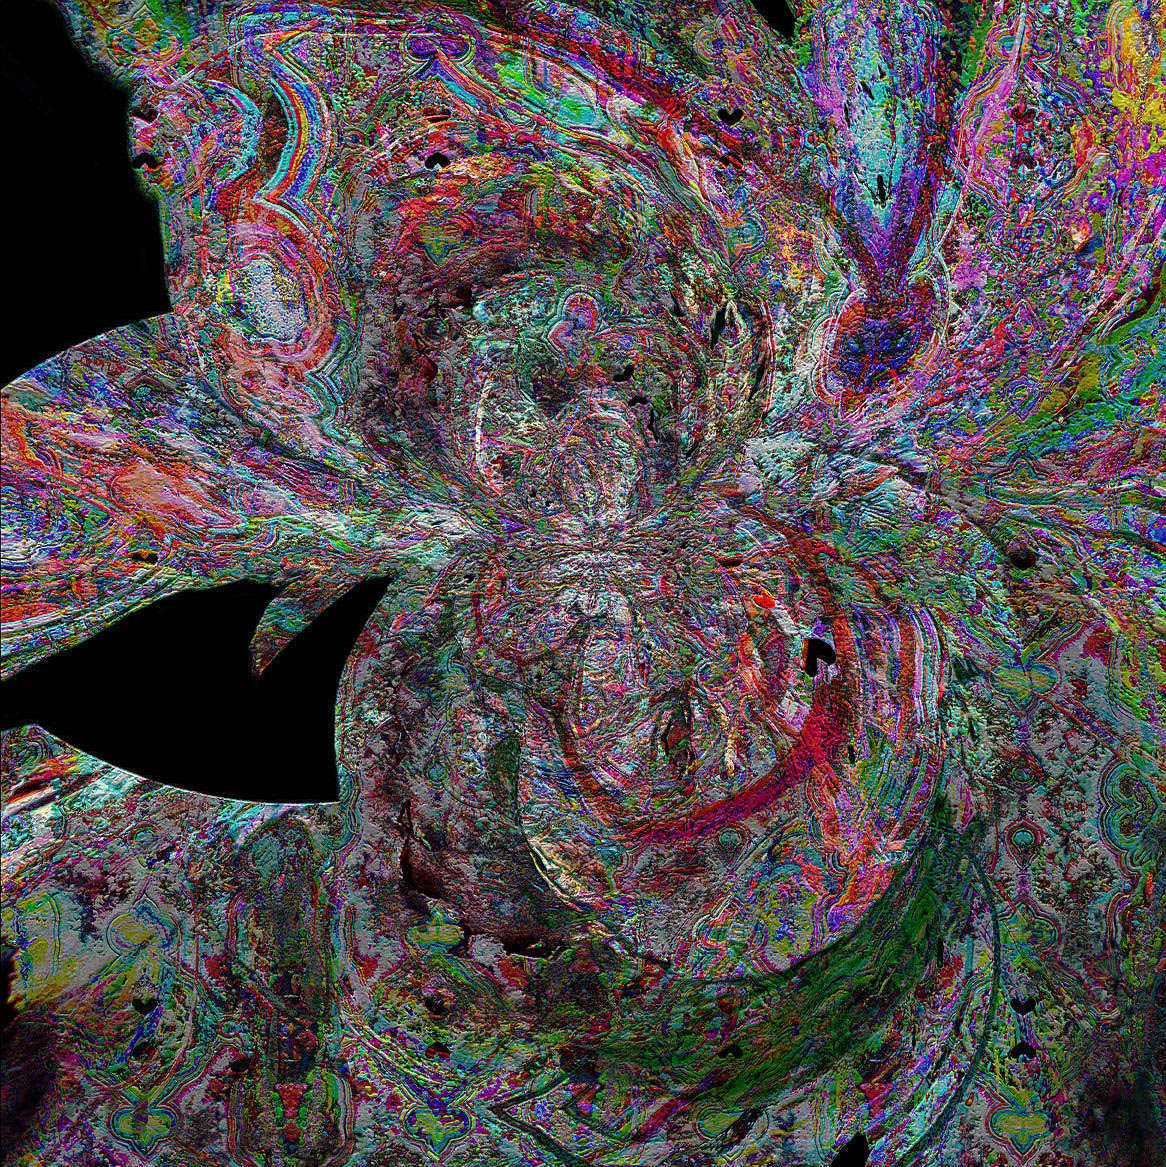 bc_23-Indian-Meditation-God.jpg : Section 4 : American artist digital invention archival artifact color print image emerging capture creative convergent transparency universe dream history painter Hybrid exhibition